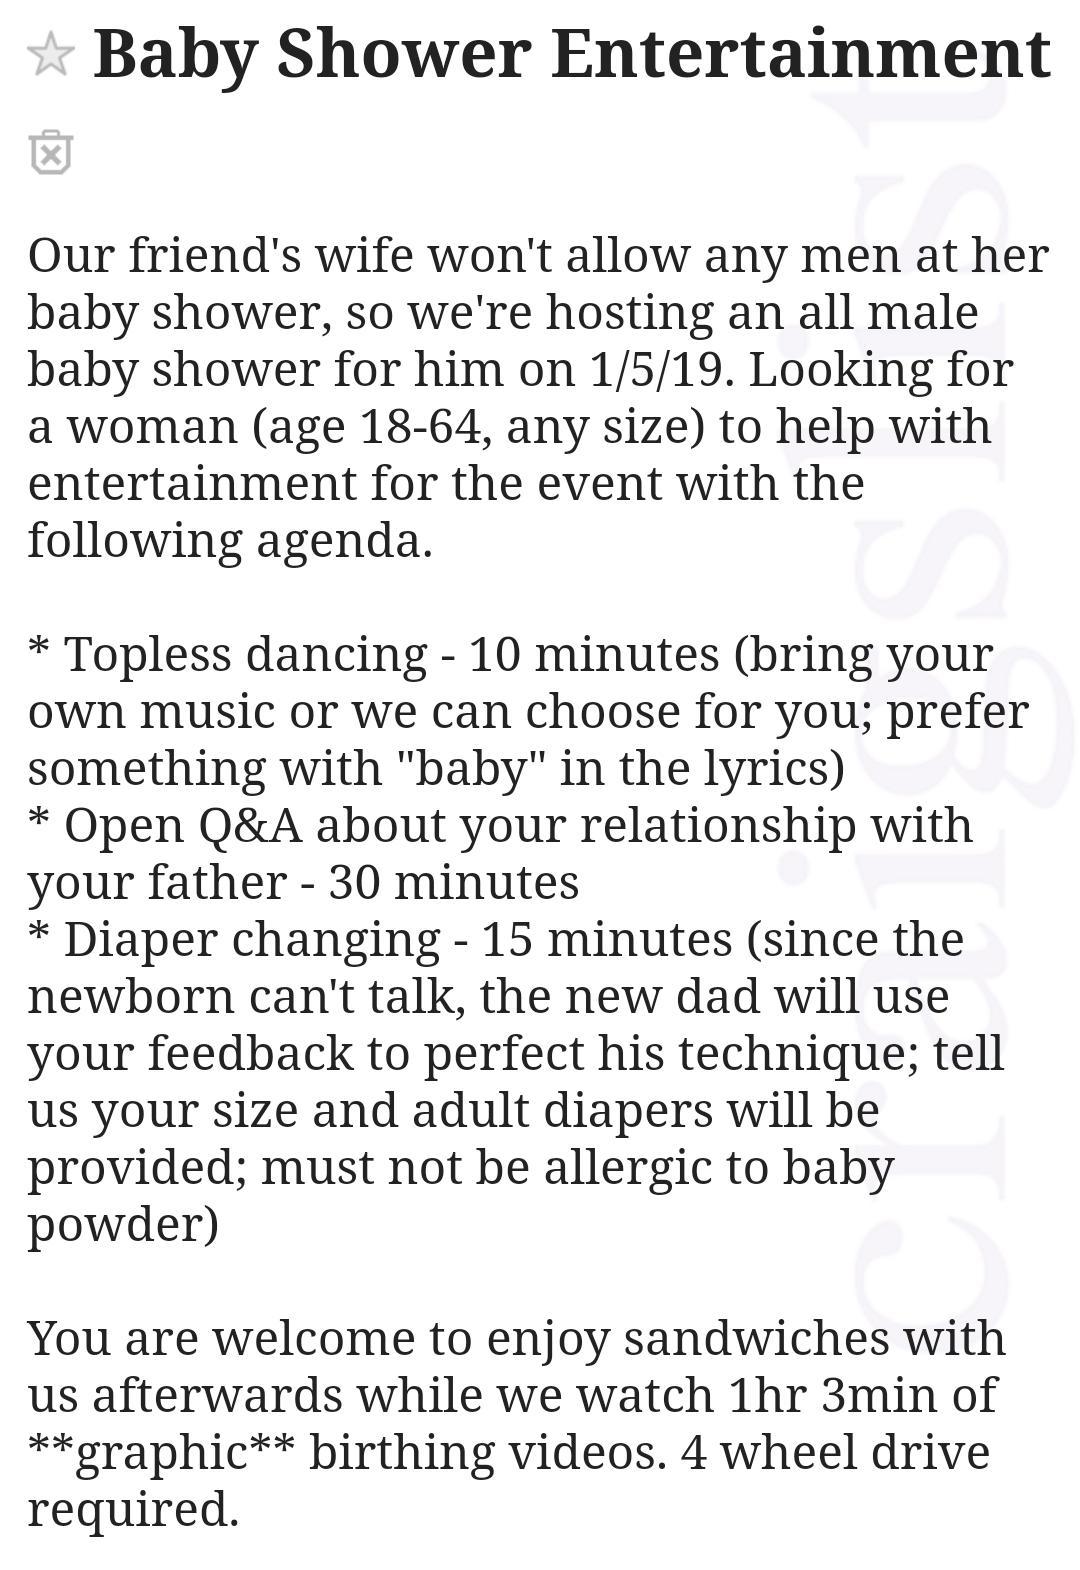 power iso serial - Baby Shower Entertainment Our friend's wife won't allow any men at her baby shower, so we're hosting an all male baby shower for him on 1519. Looking for a woman age 1864, any size to help with entertainment for the event with the ing a